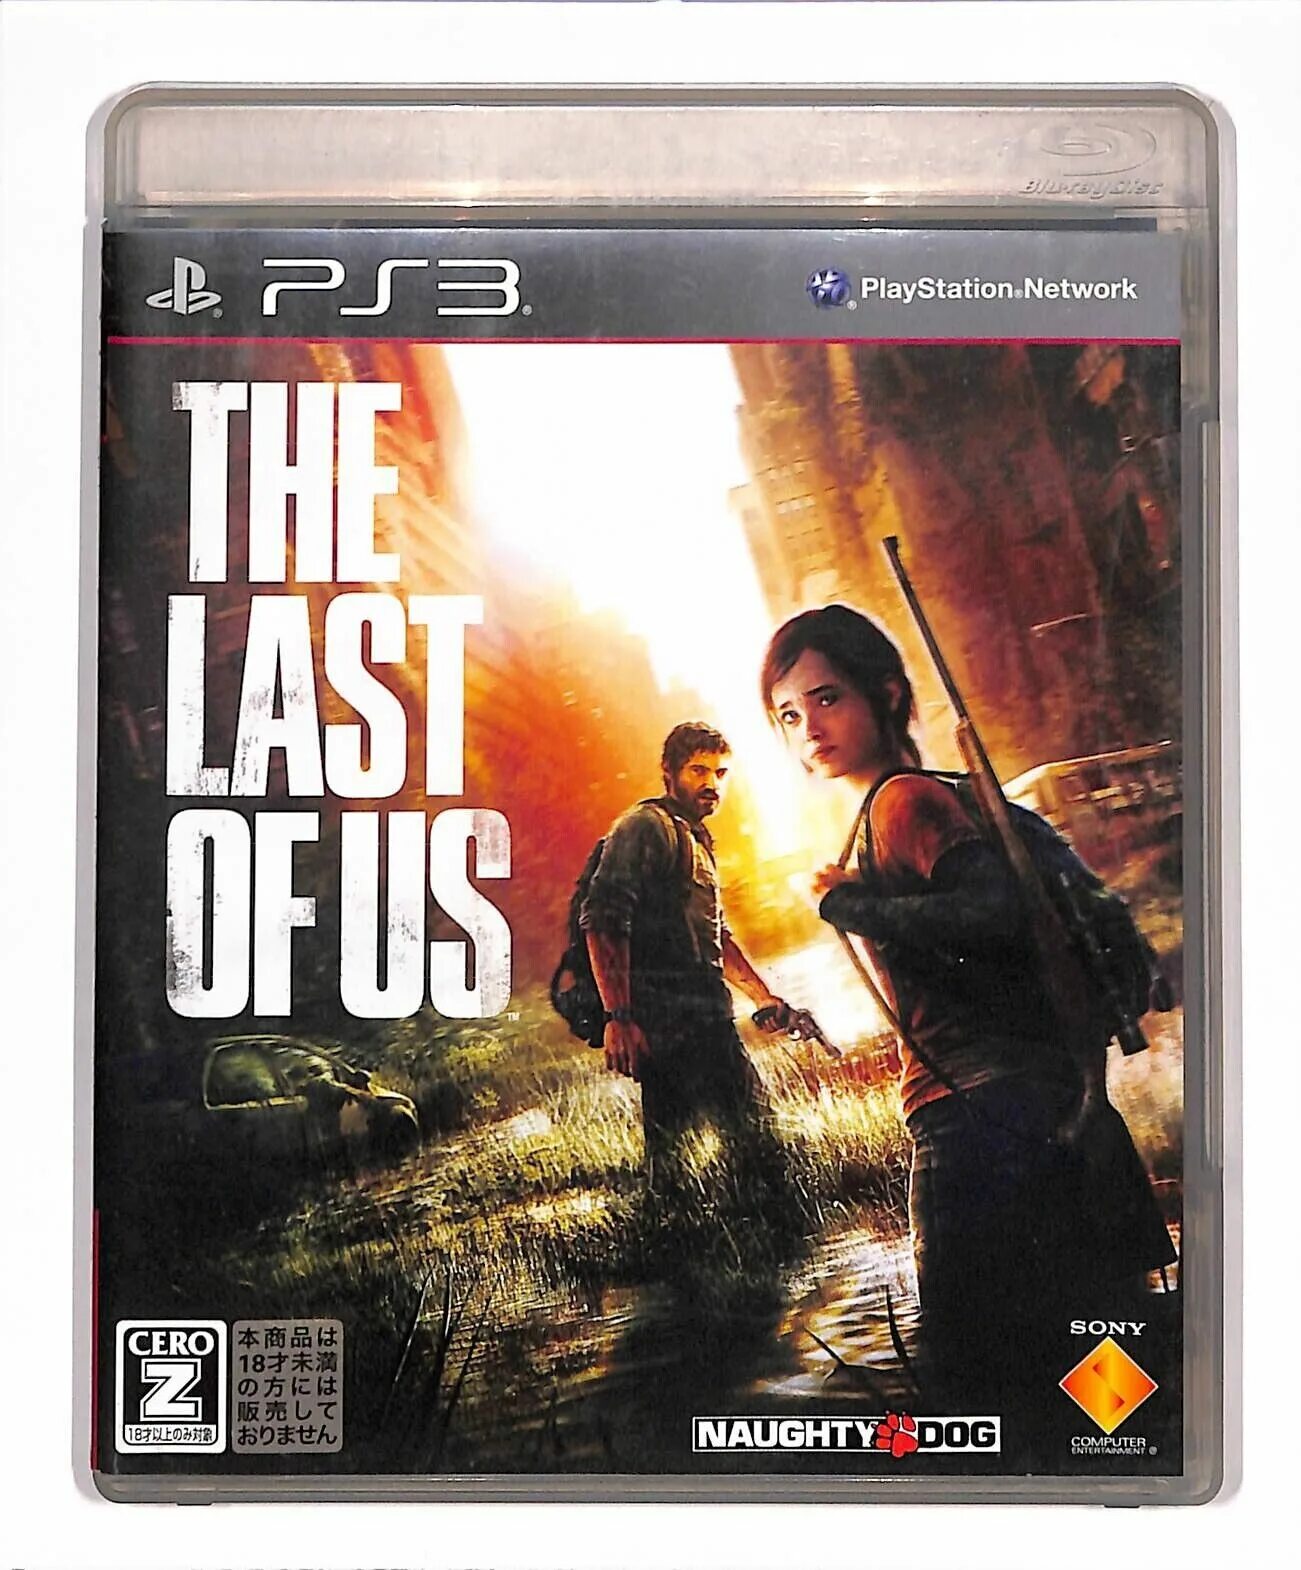 The last of us обложка ps3. The last of us 1 диск на ПС 3. The last of us 2013 обложка. The last of us на пс3.